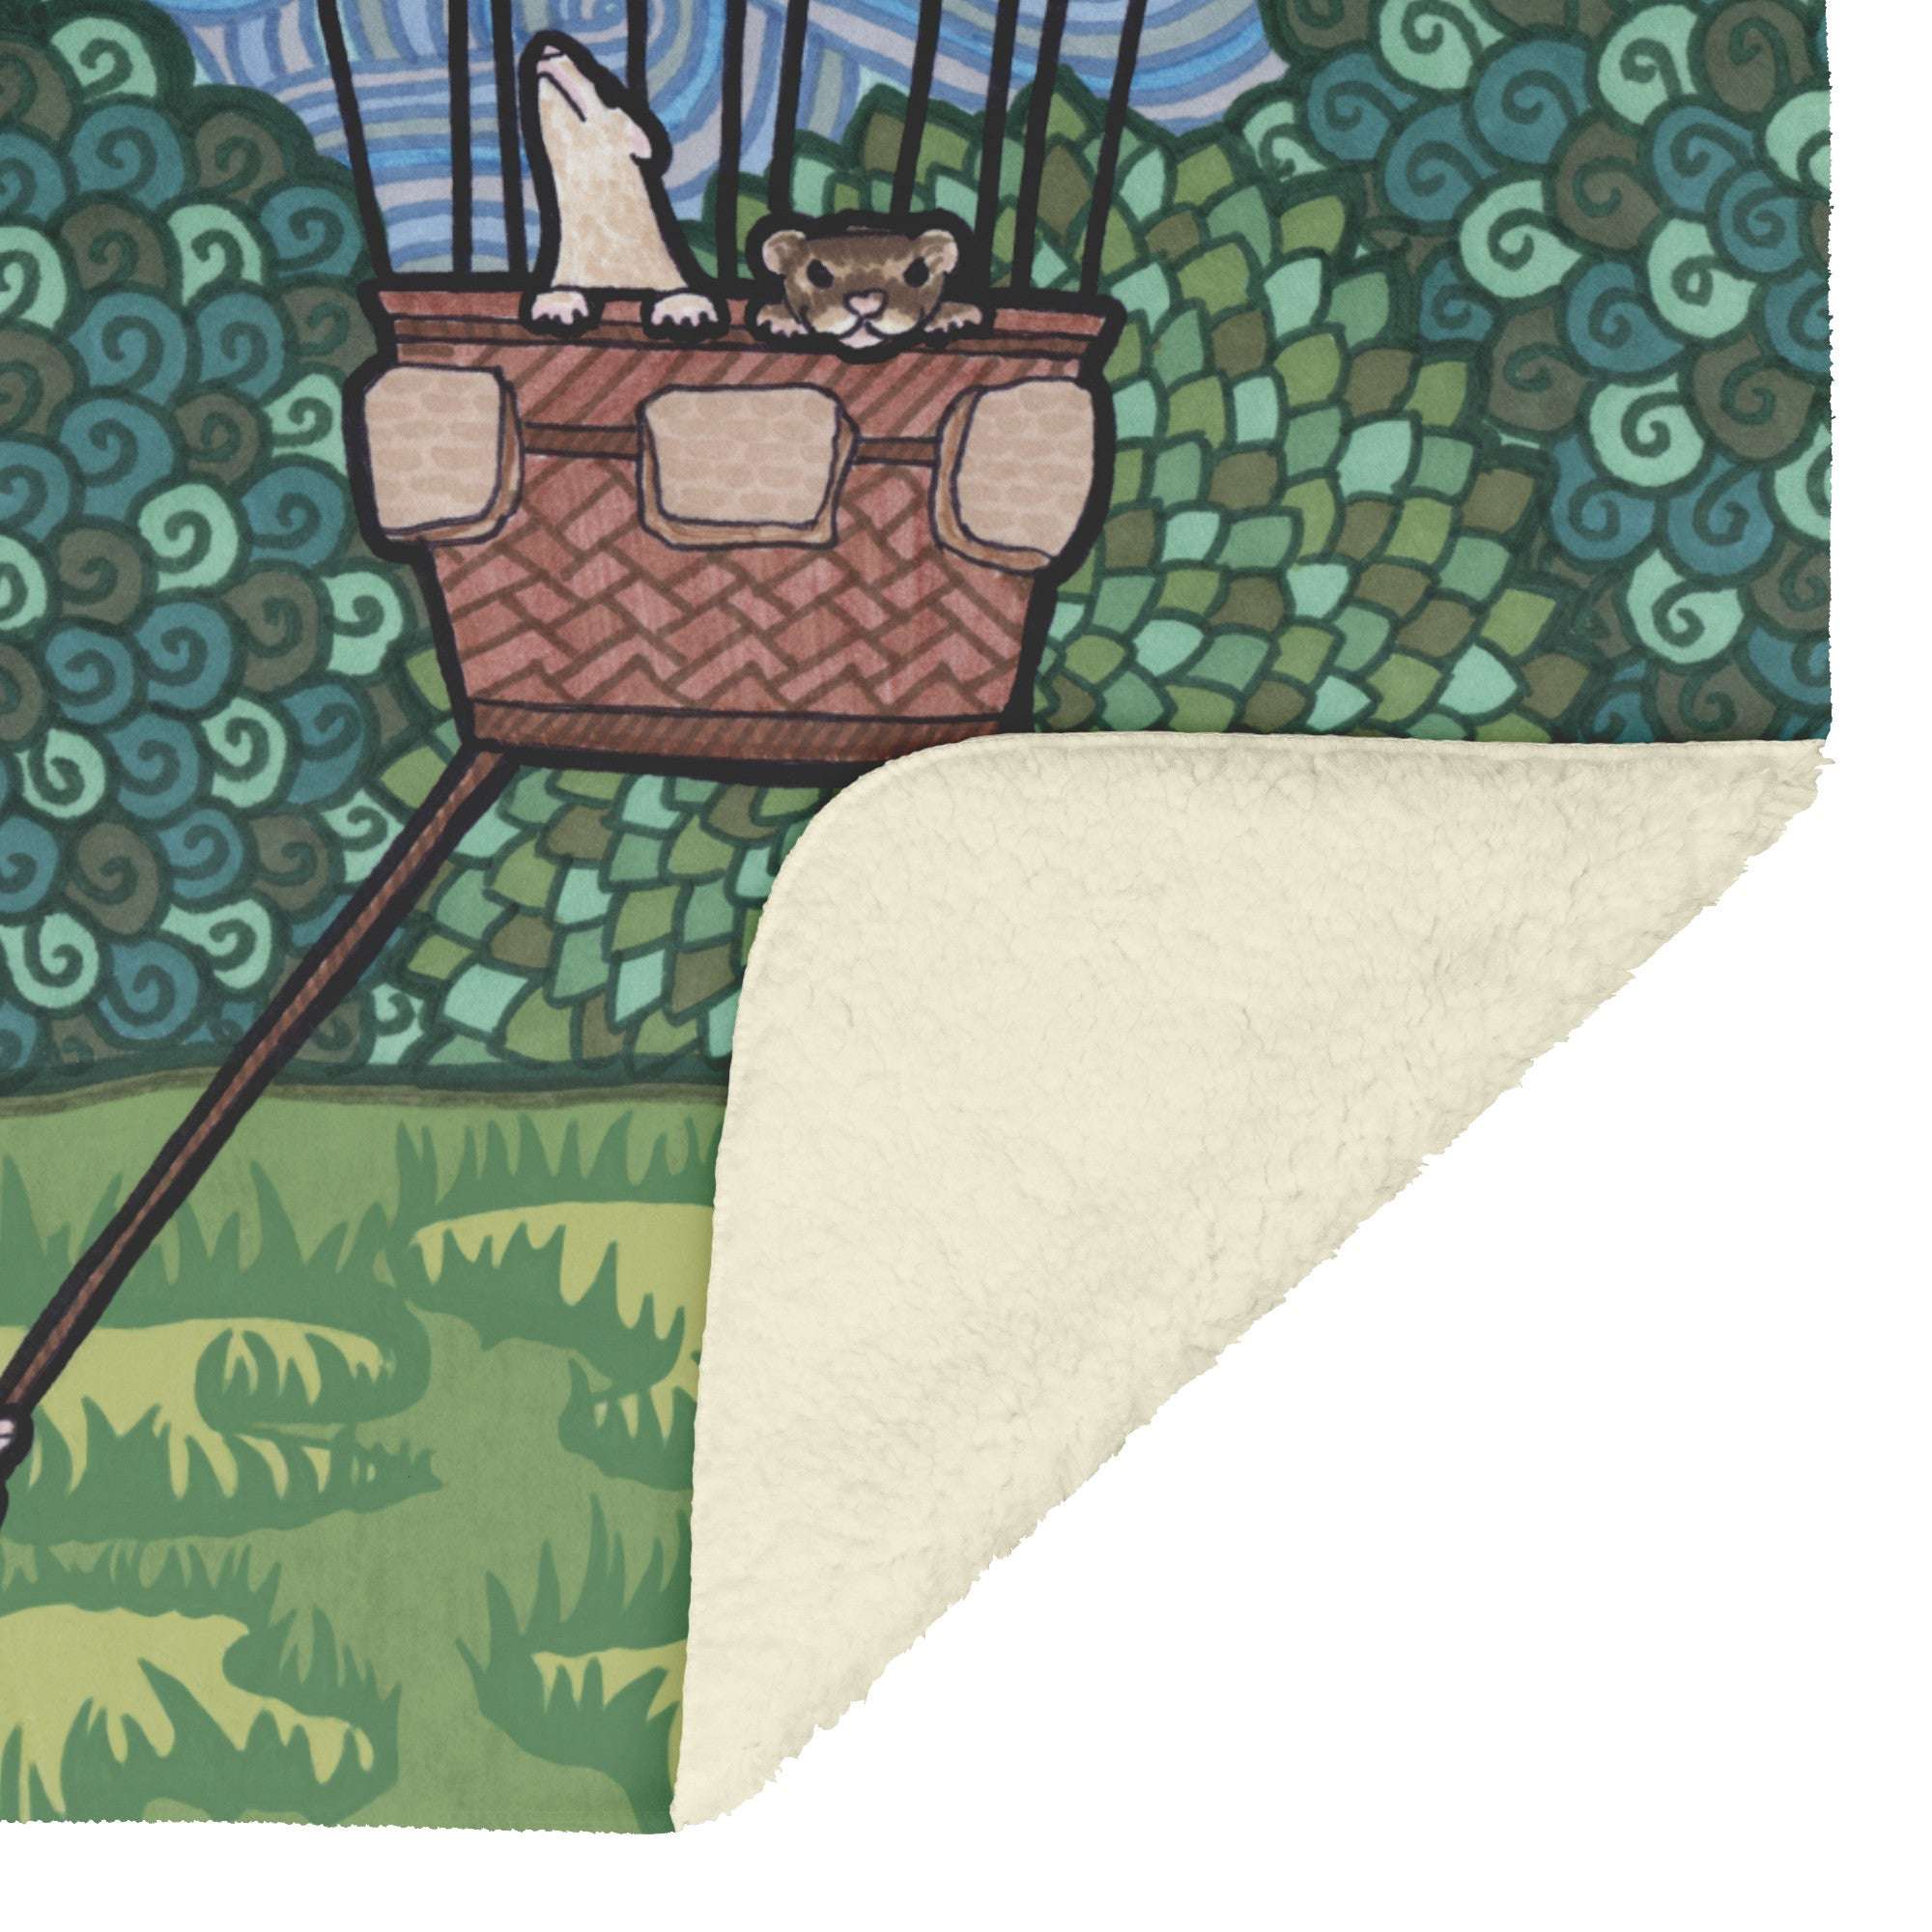 Illustration of ferrets inside a hot air balloon on a Ferret Flight Blanket, with one corner showing the sherpa fleece backside.